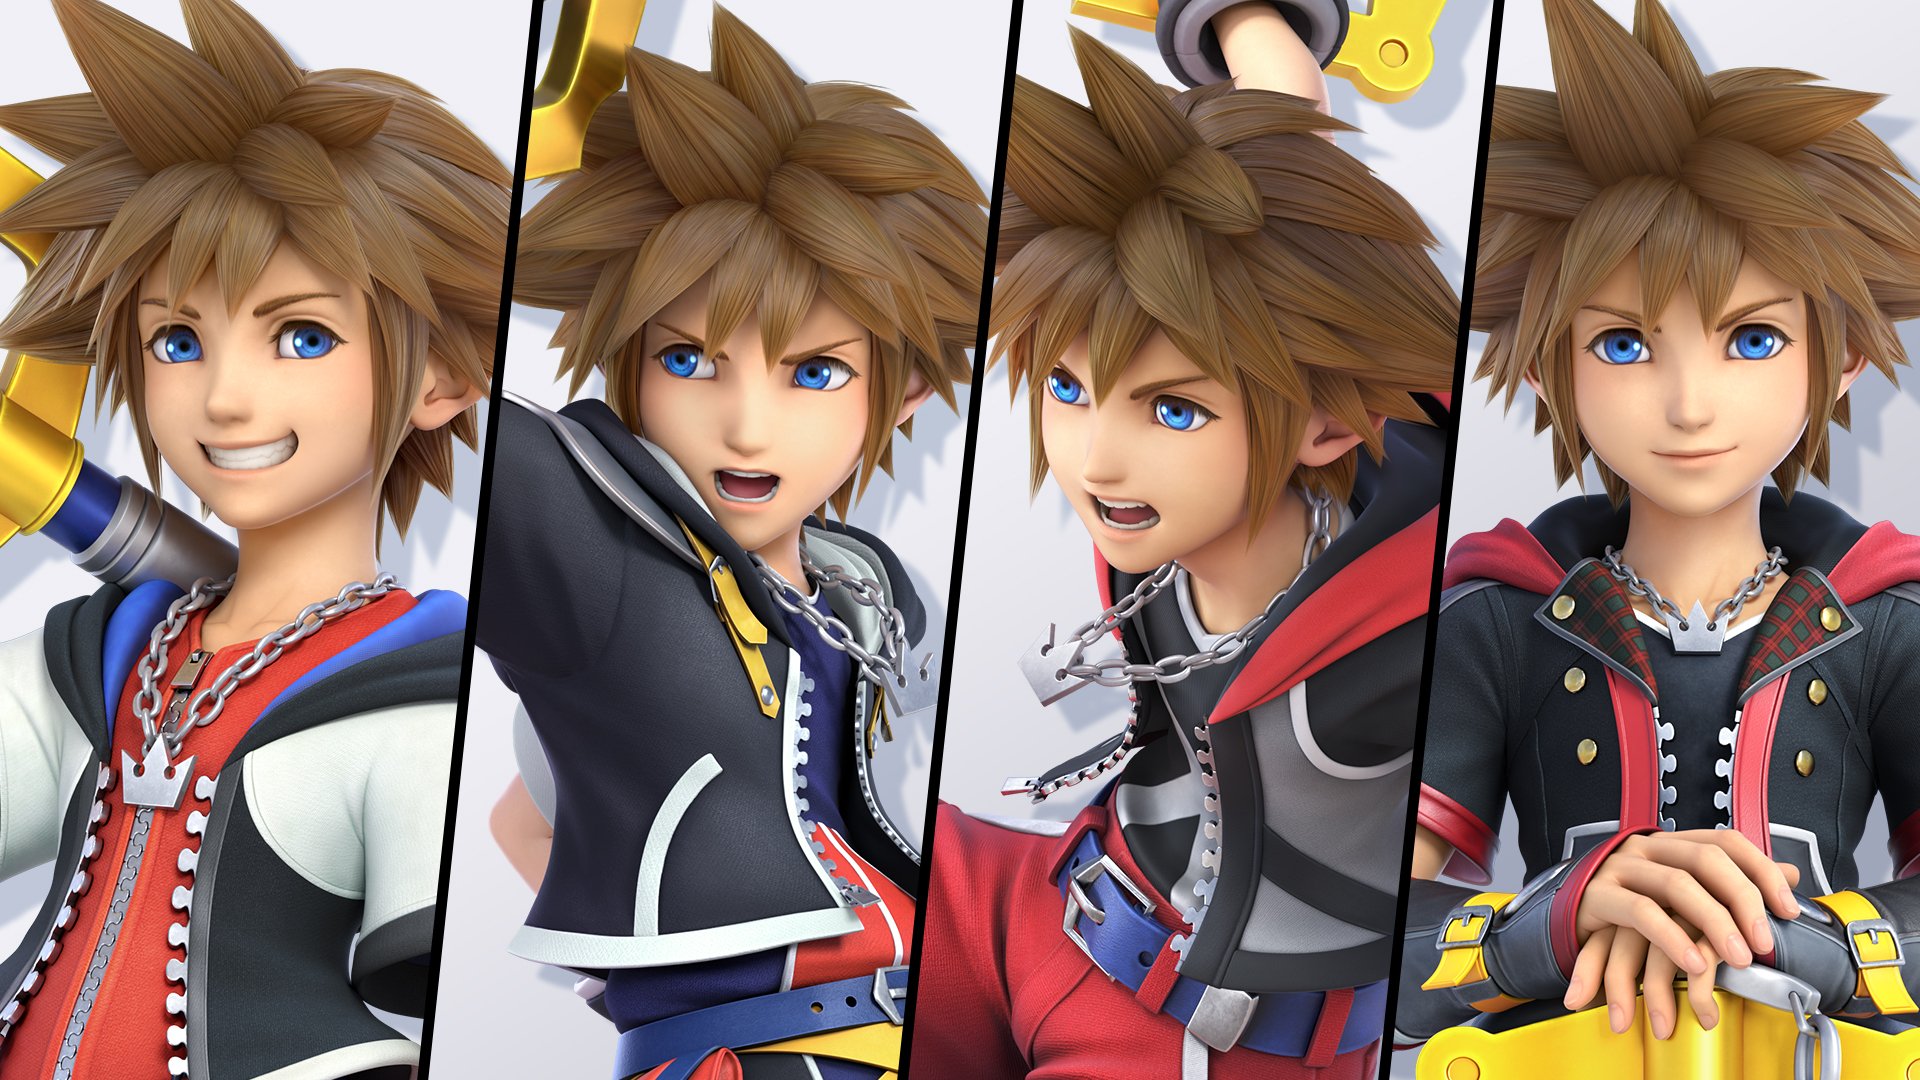 Inspired by his moves in Kingdom Hearts, Sora excels at fighting in the air...